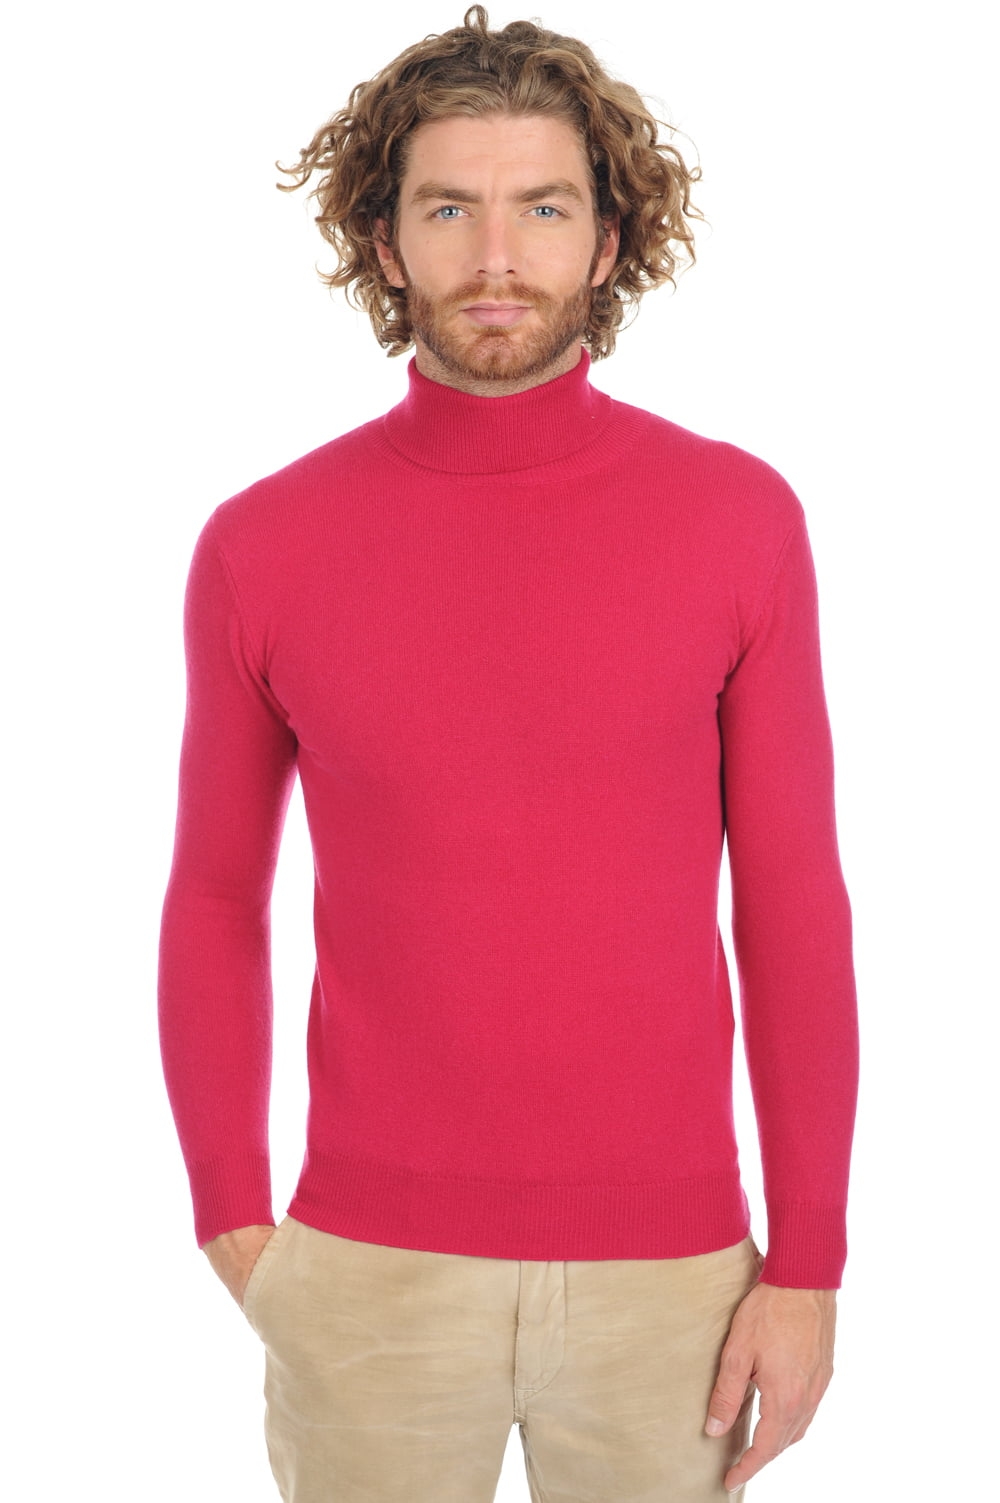 Cachemire petits prix homme tarry first red fuschsia m